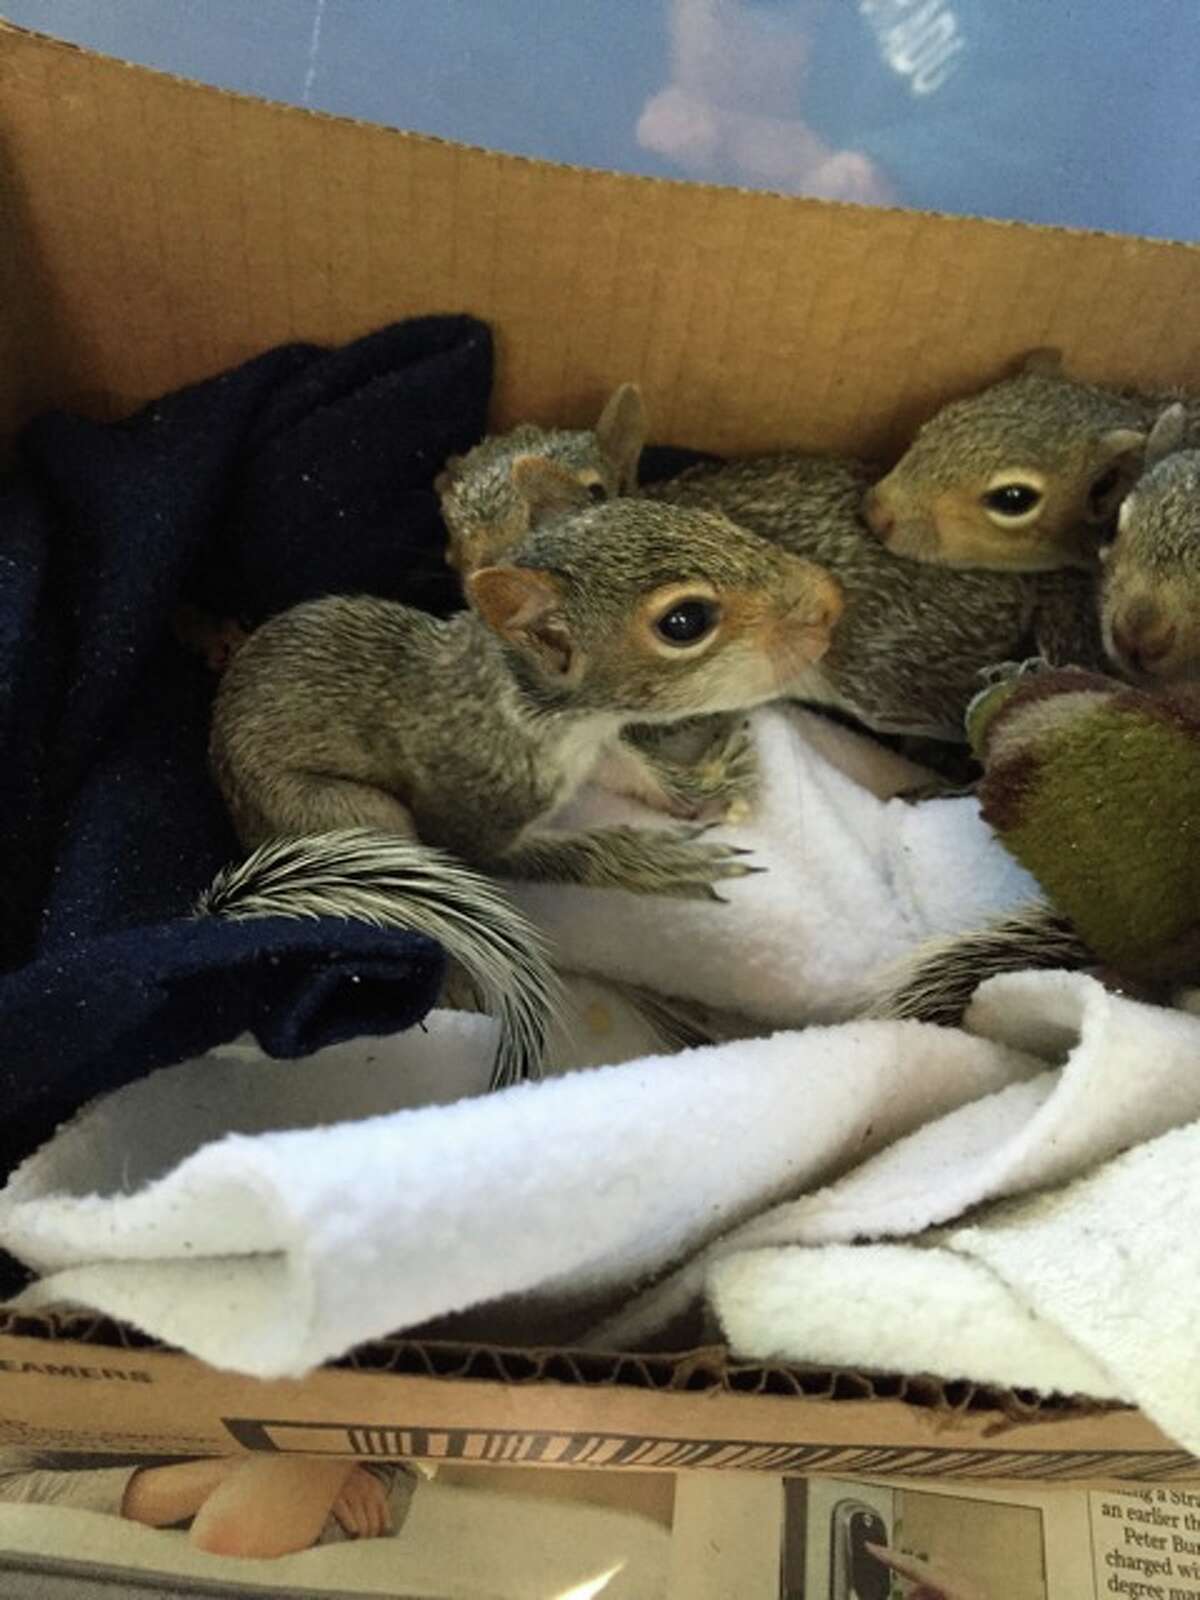 Rescued baby squirrels play with each other in a temporary home before being released back into the wild.